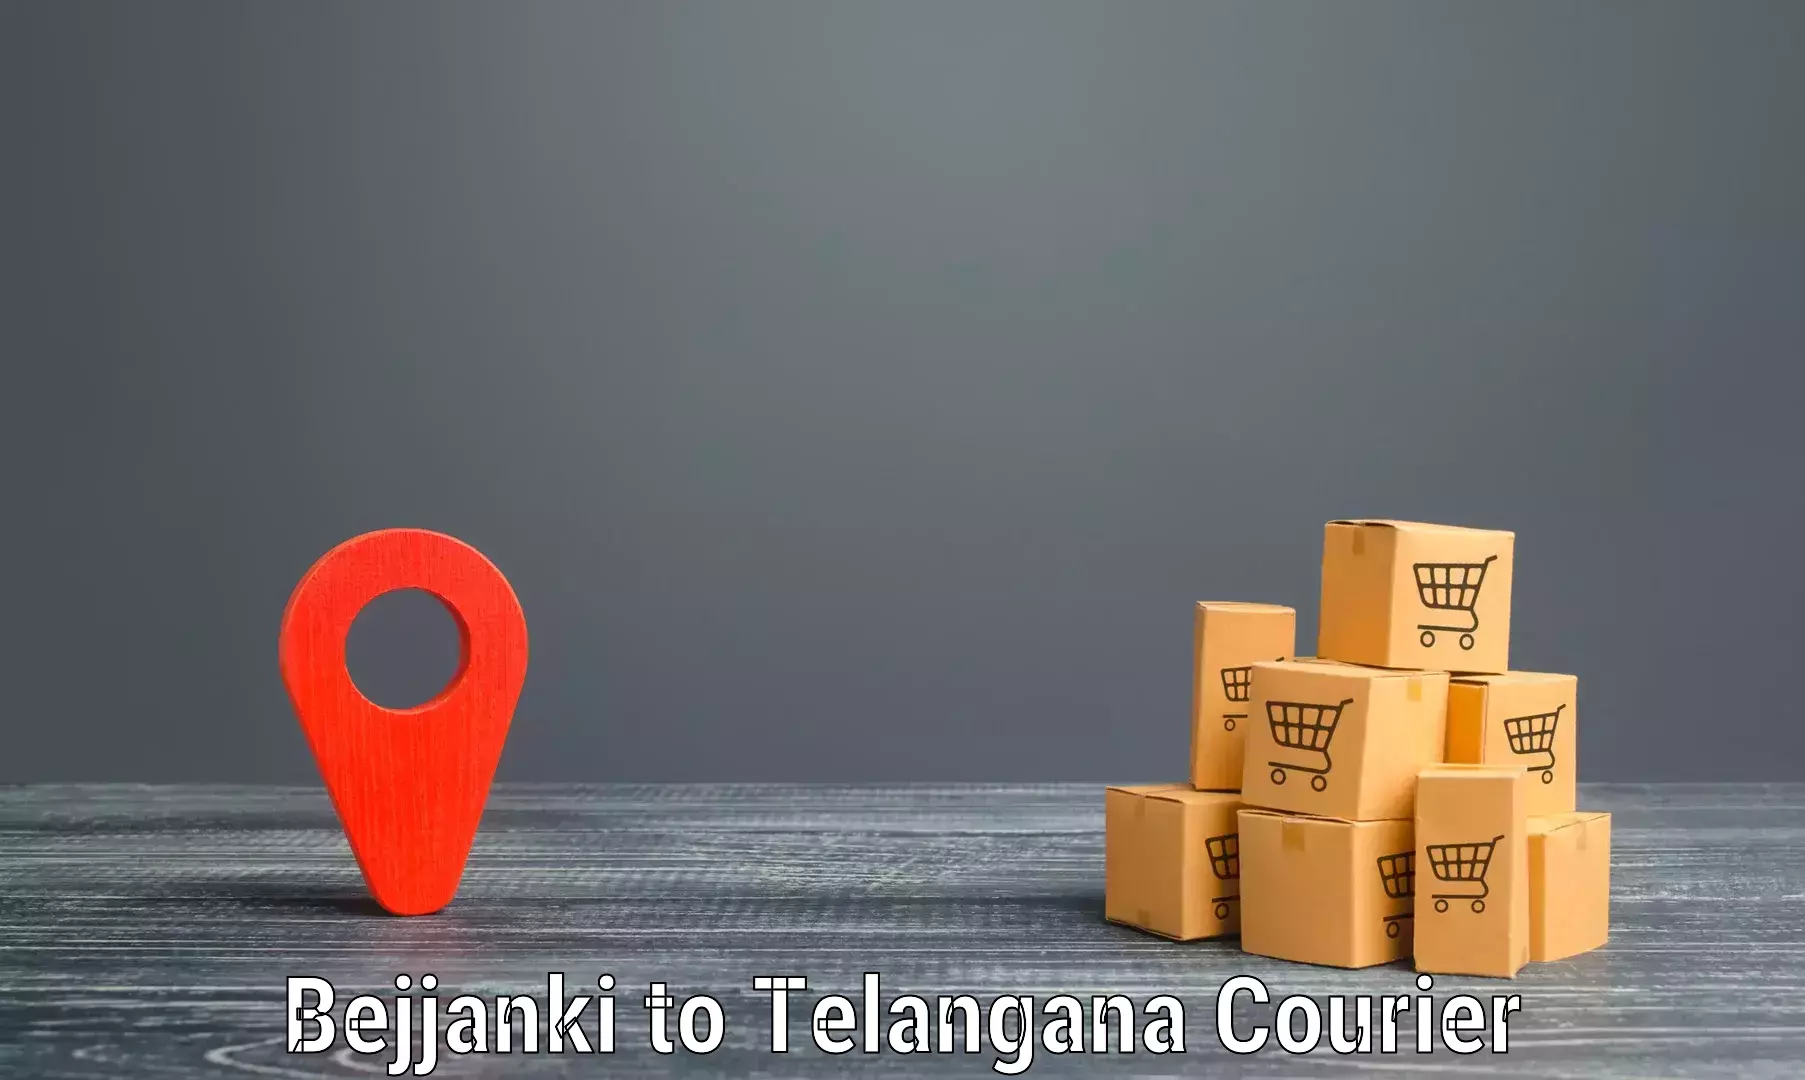 Premium courier solutions Bejjanki to Hyderabad